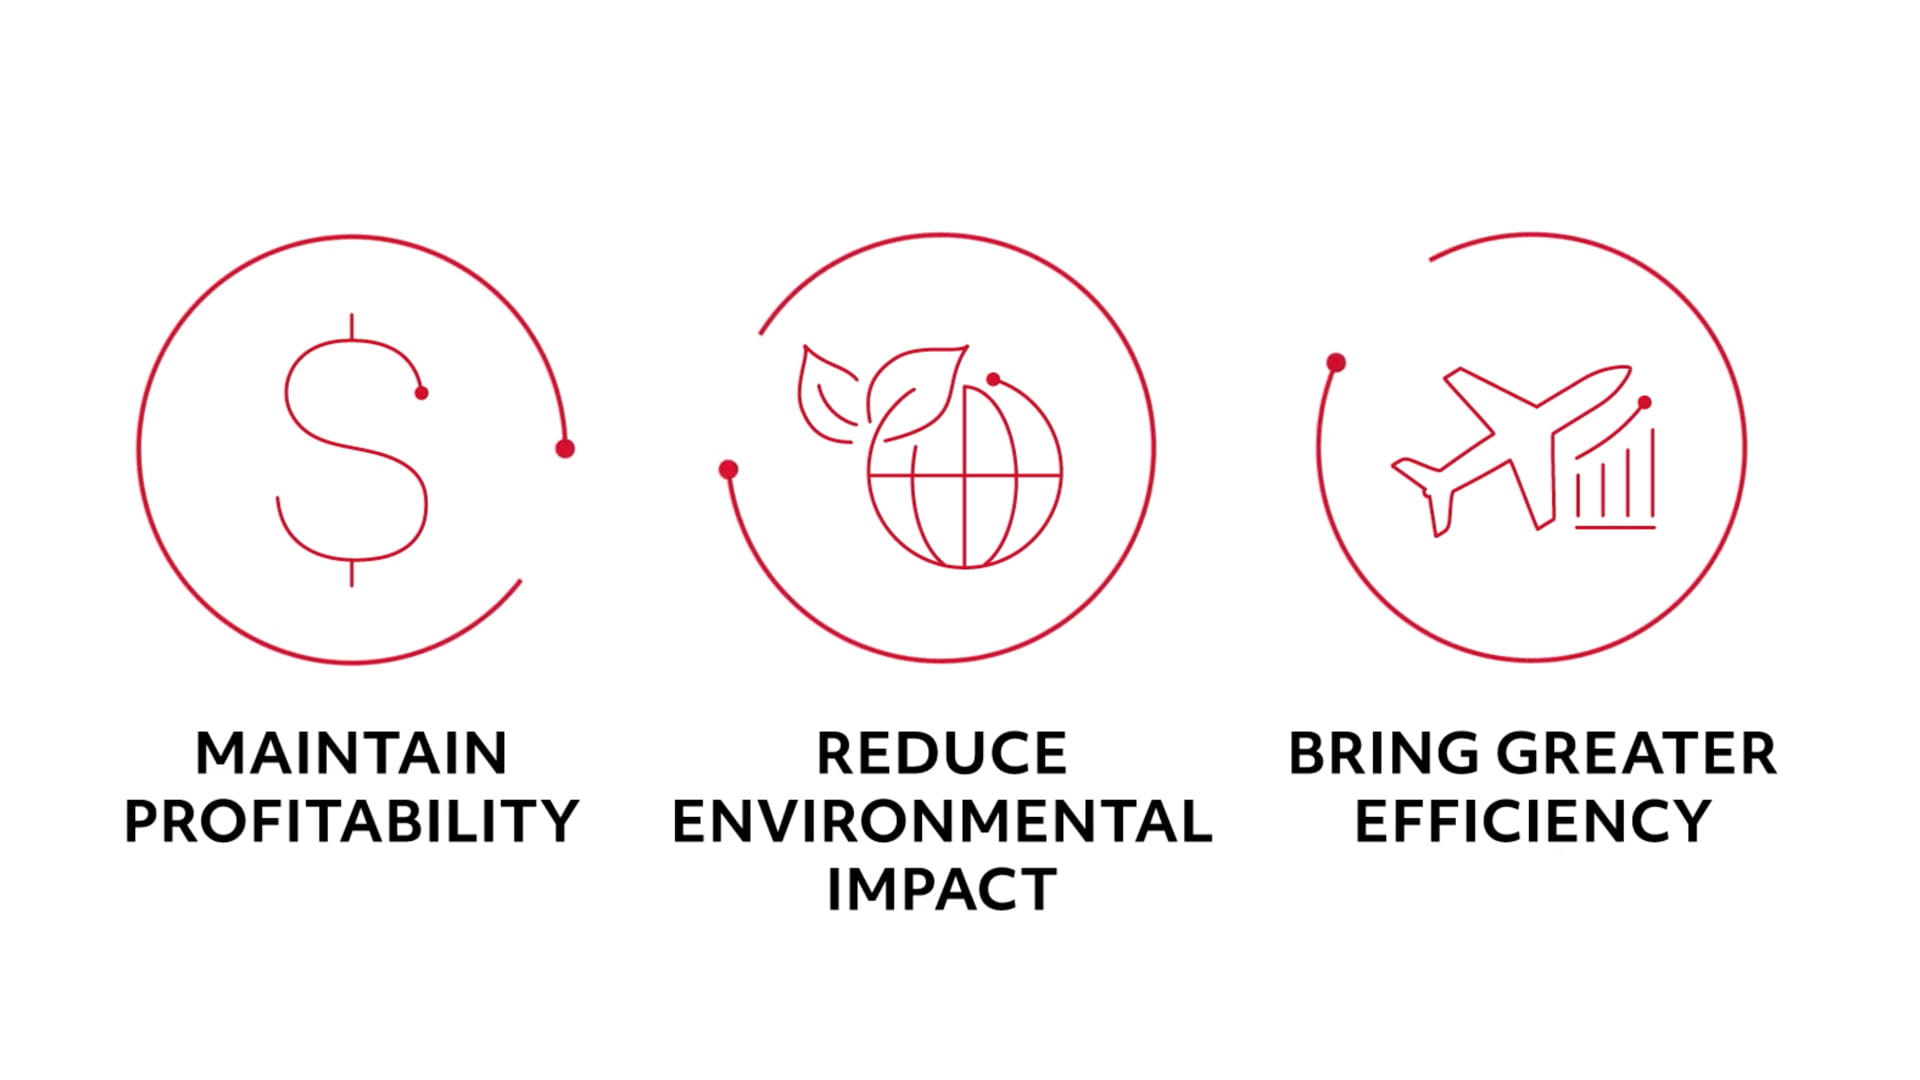 The benefits of Collins' integrated solutions include maintaining profitability, reducing environmental impact, and bringing greater efficiency